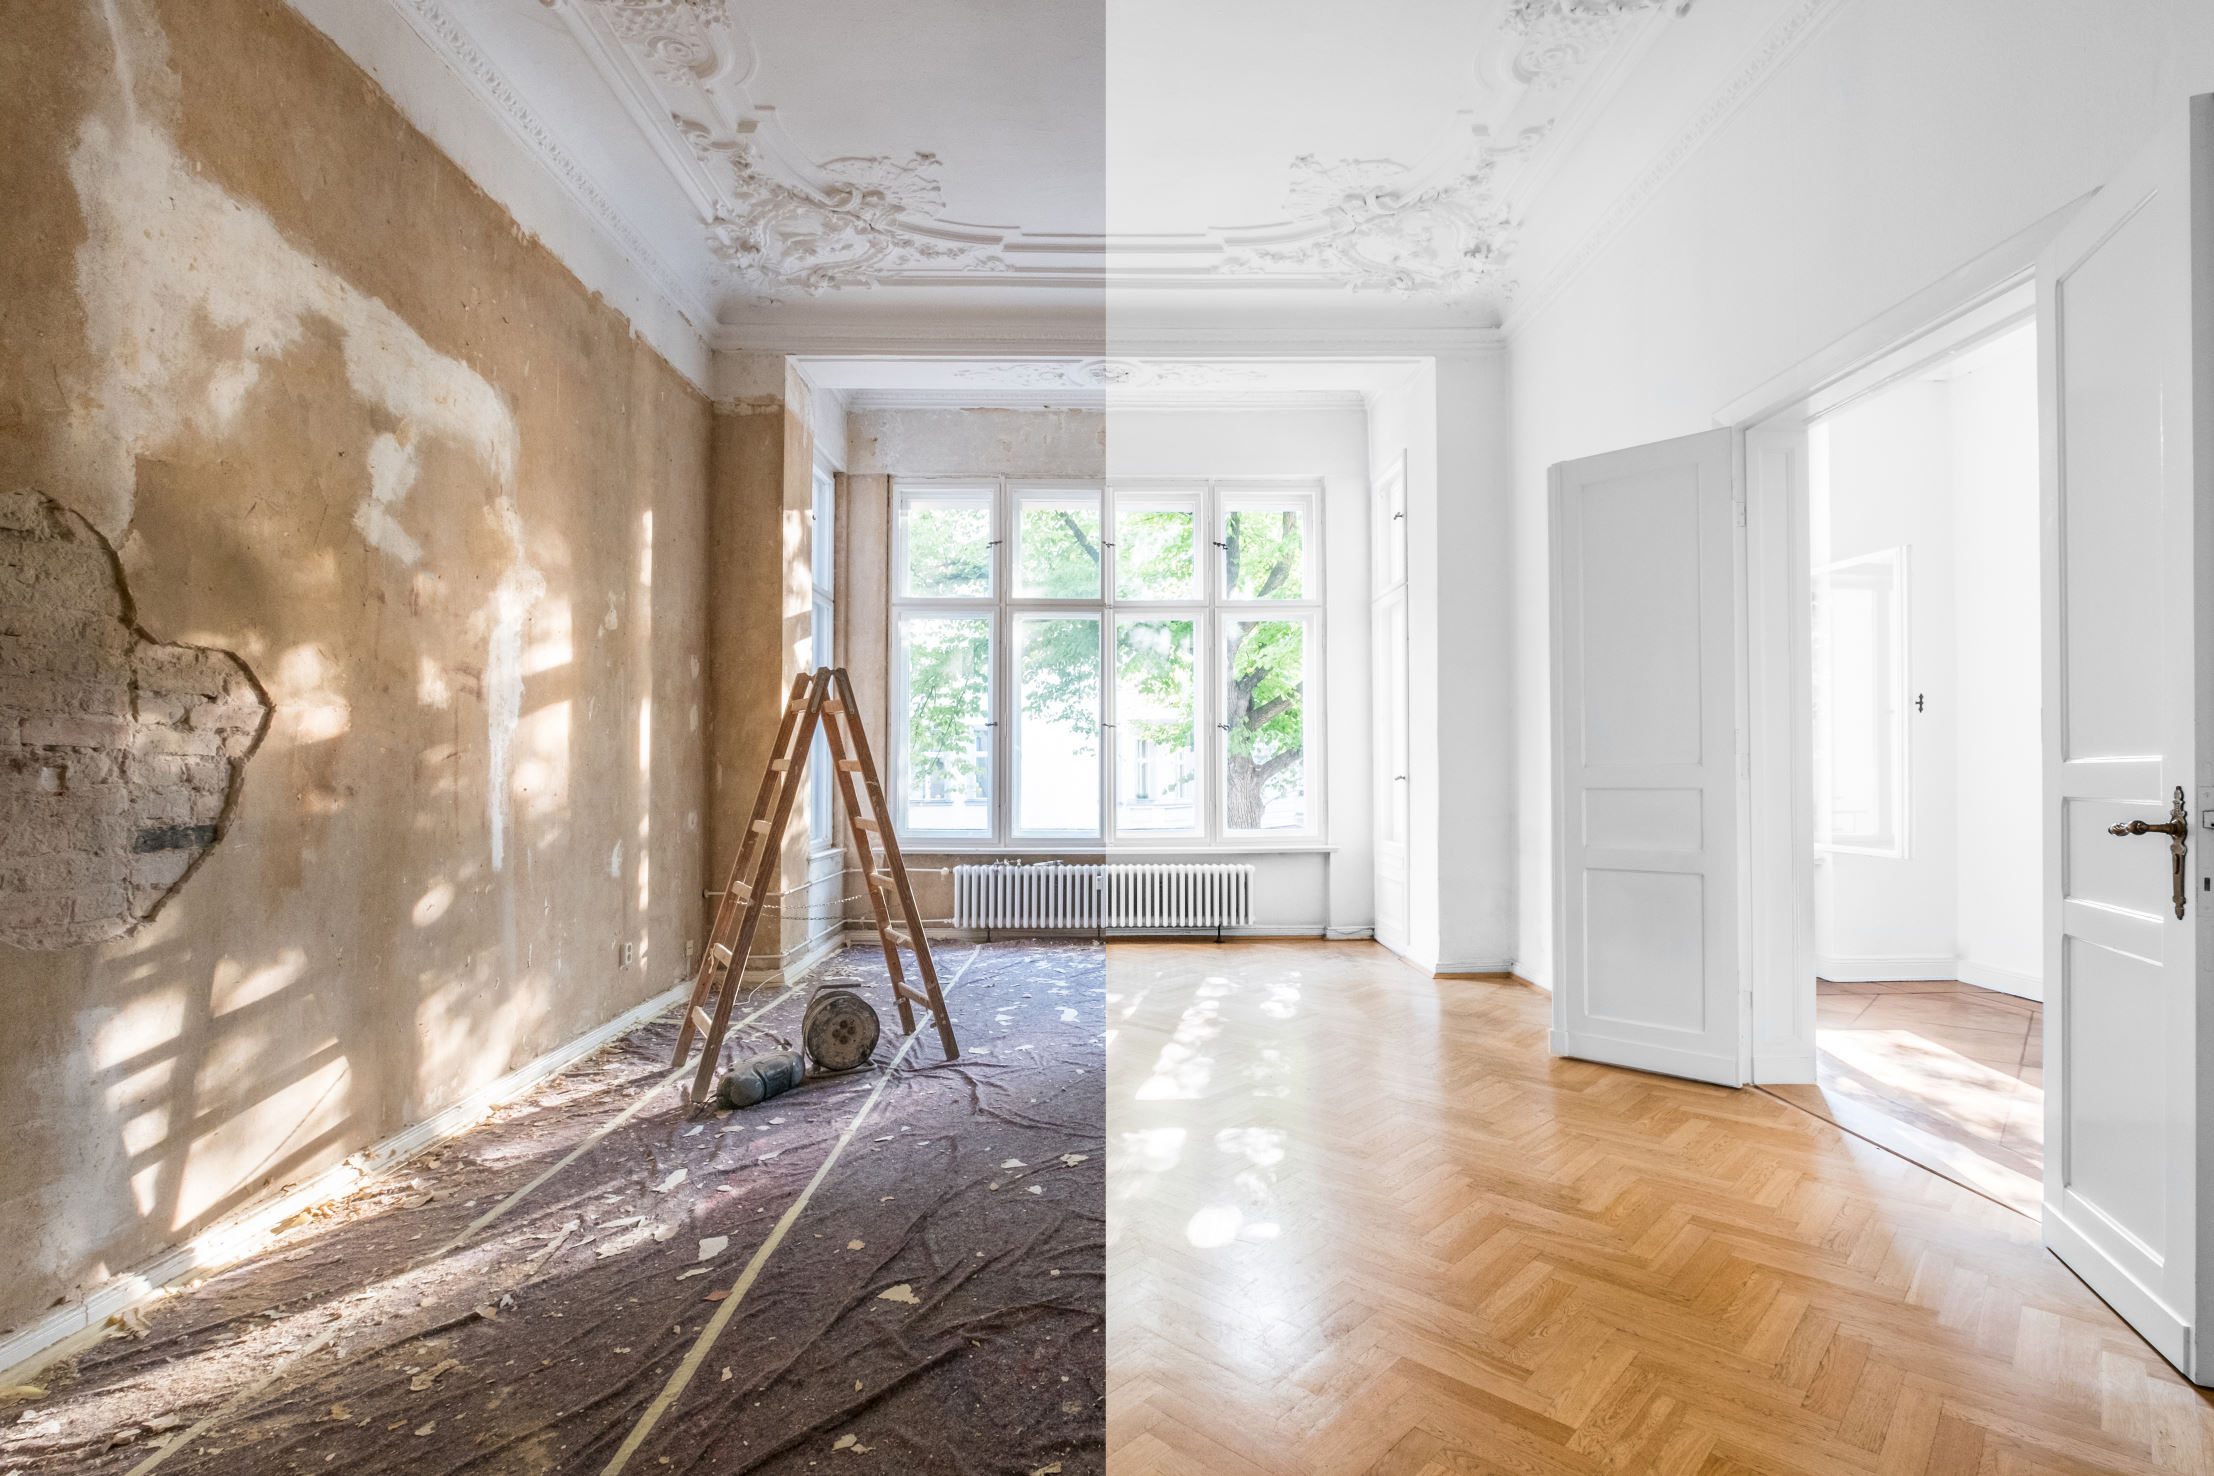 Renovation by room: What does it cost?